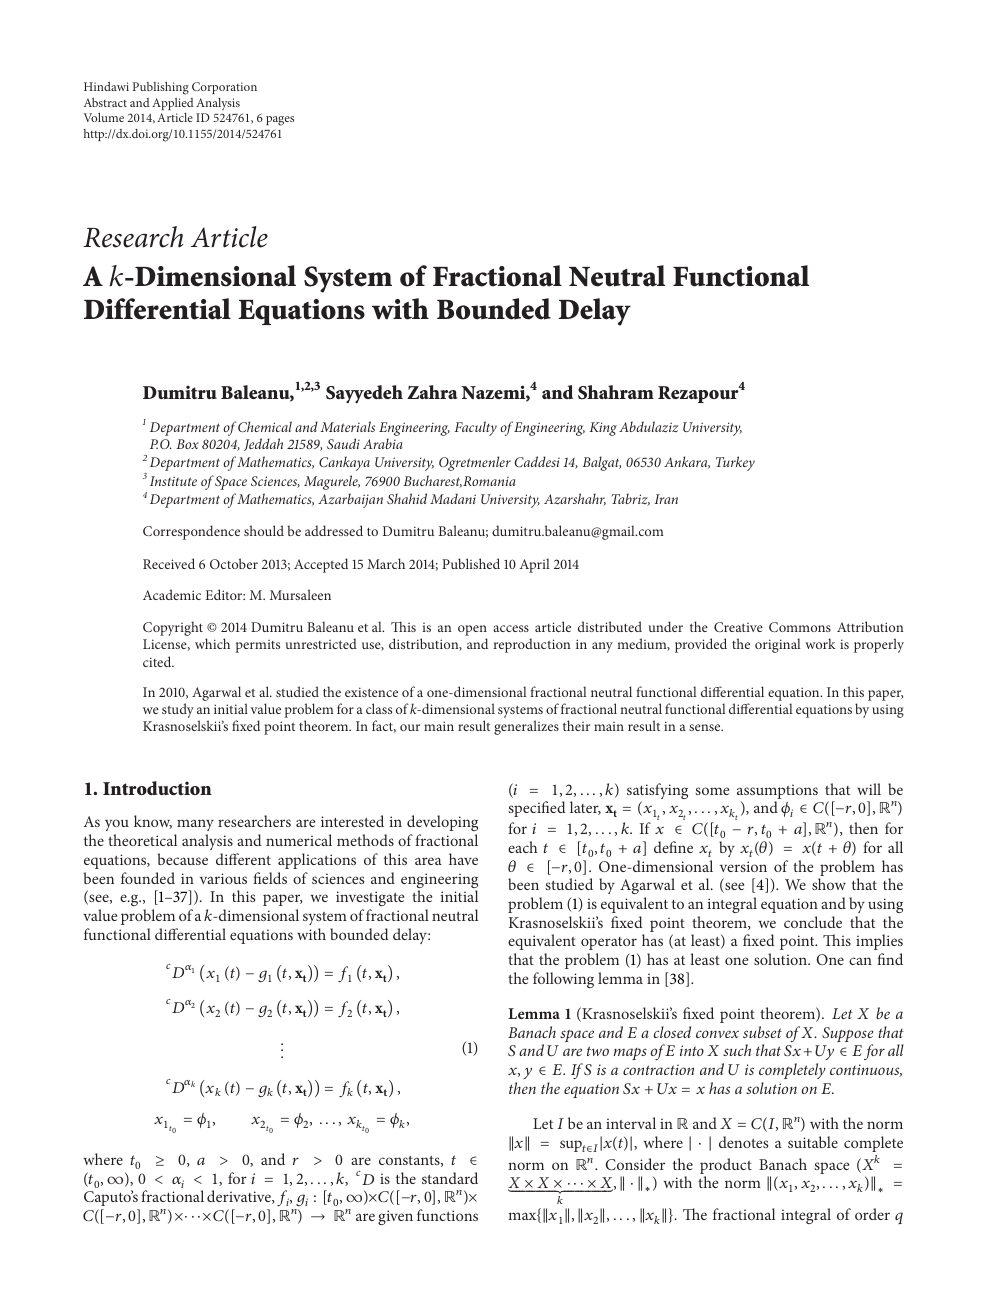 A K Dimensional System Of Fractional Neutral Functional Differential Equations With Bounded Delay Topic Of Research Paper In Mathematics Download Scholarly Article Pdf And Read For Free On Cyberleninka Open Science